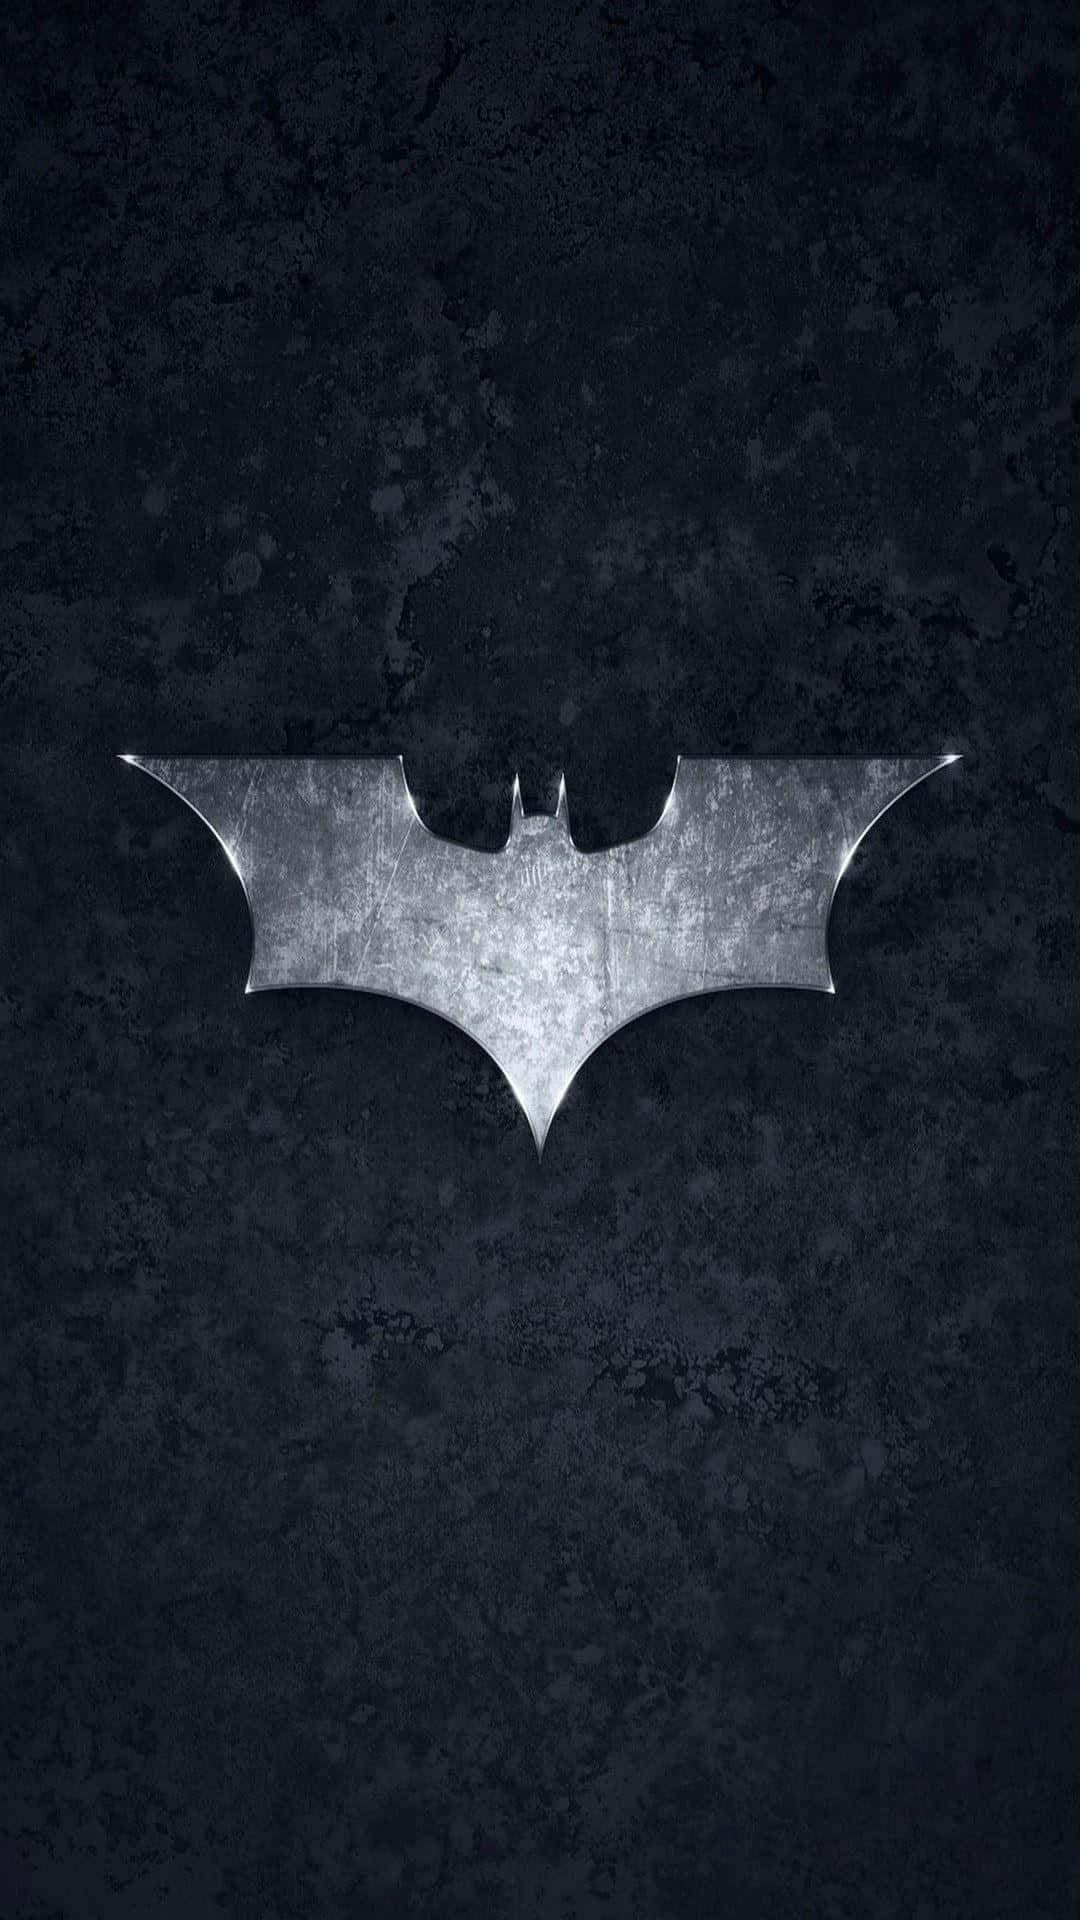 Batman’s journey continues - this time as an Android Wallpaper